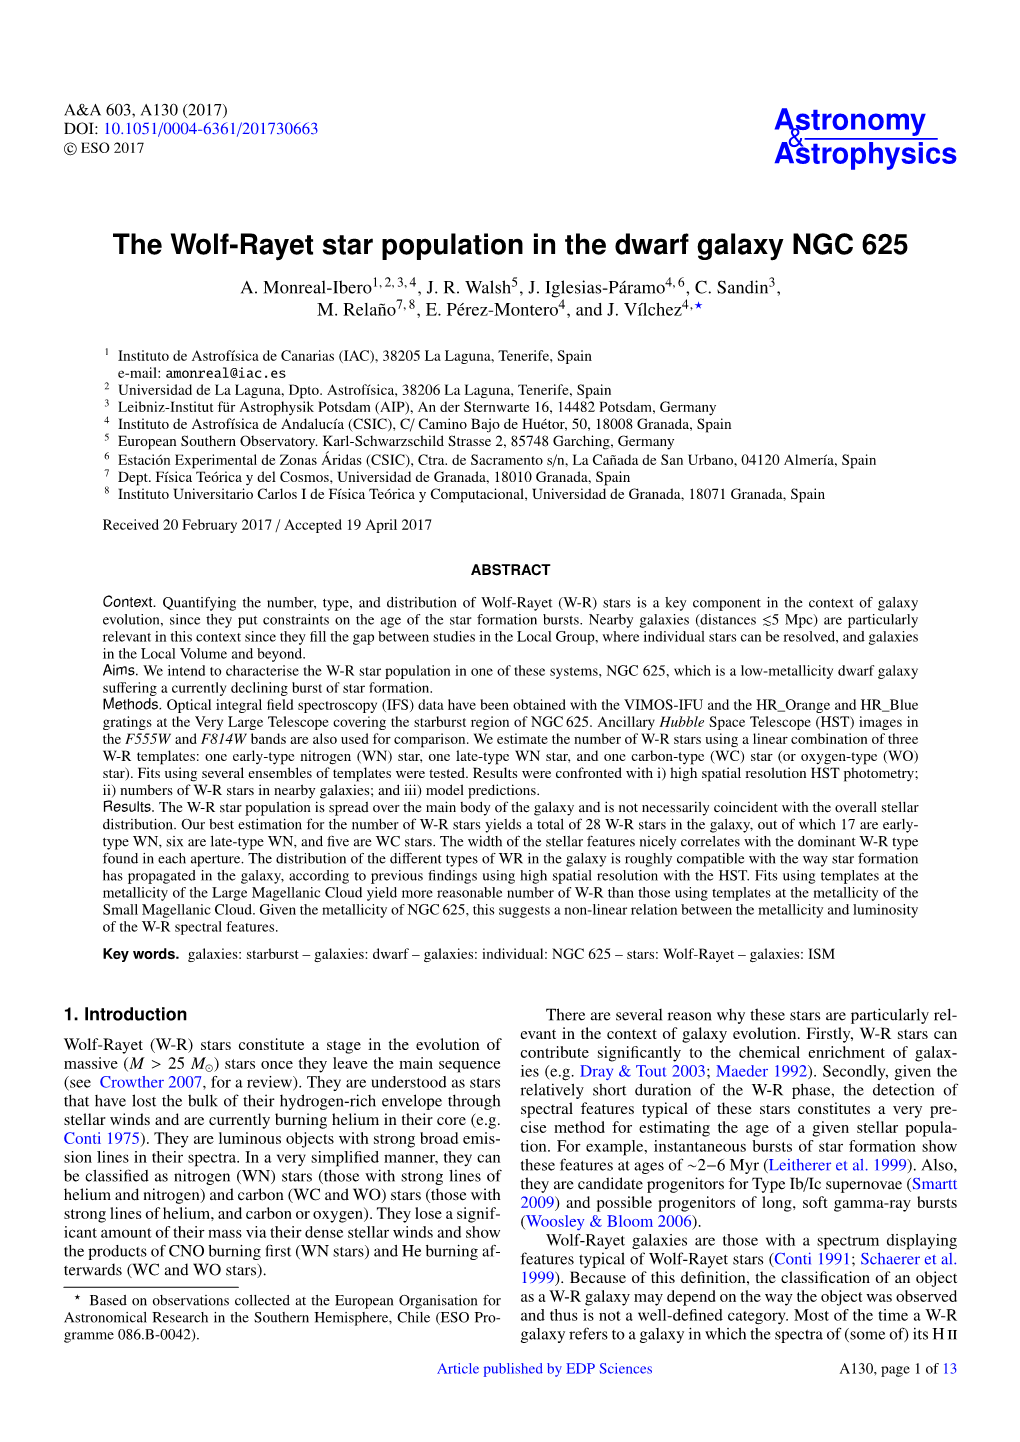 The Wolf-Rayet Star Population in the Dwarf Galaxy NGC 625 A